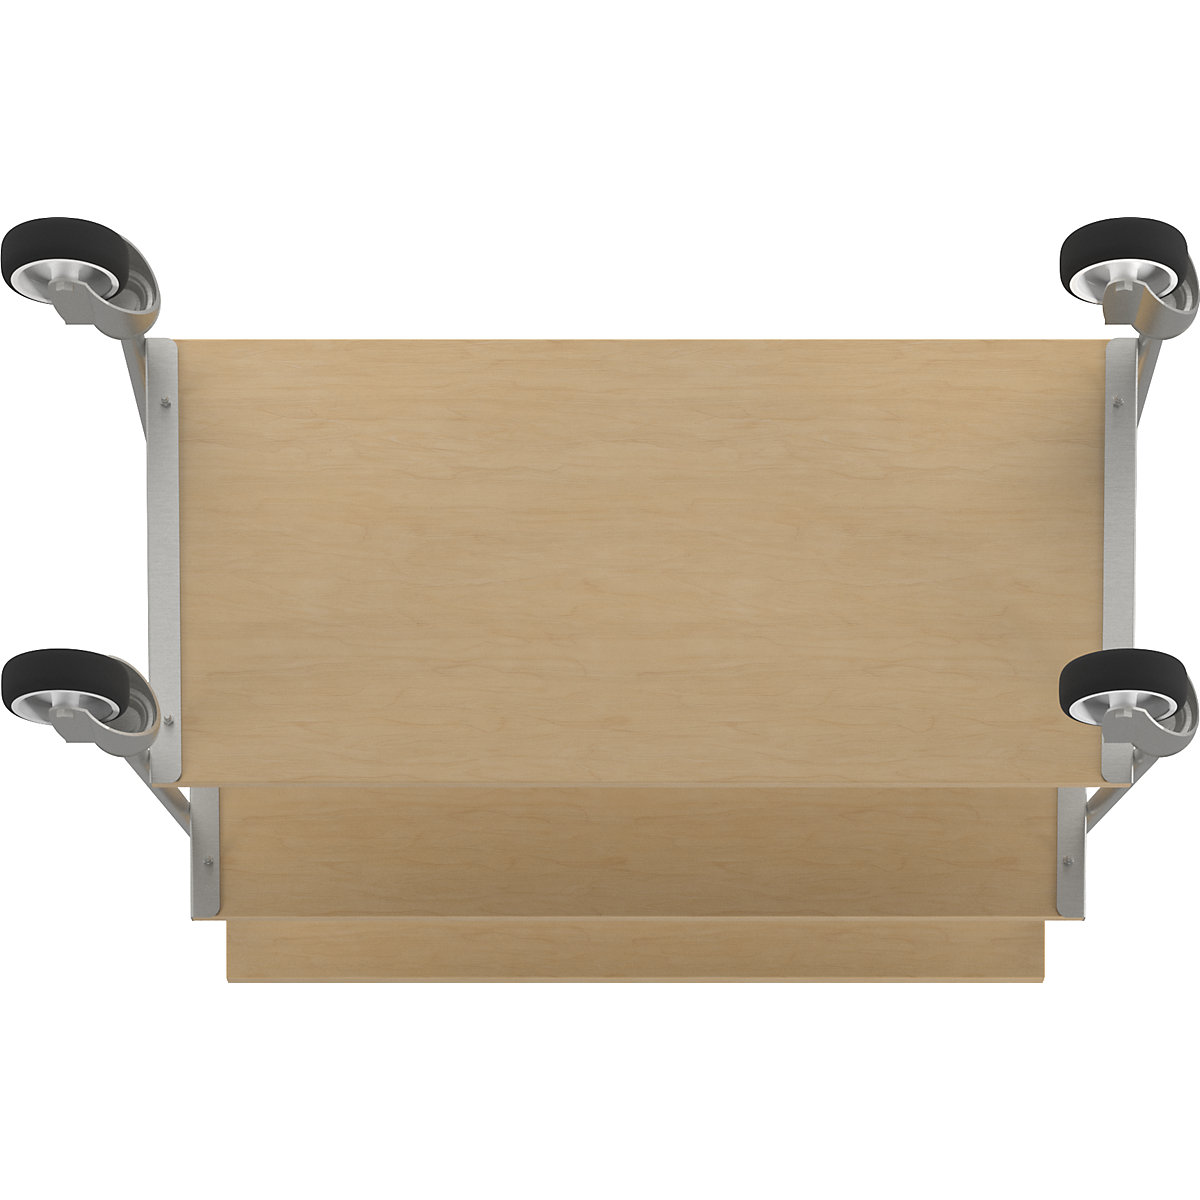 Folder trolley with 2 shelves (Product illustration 8)-7